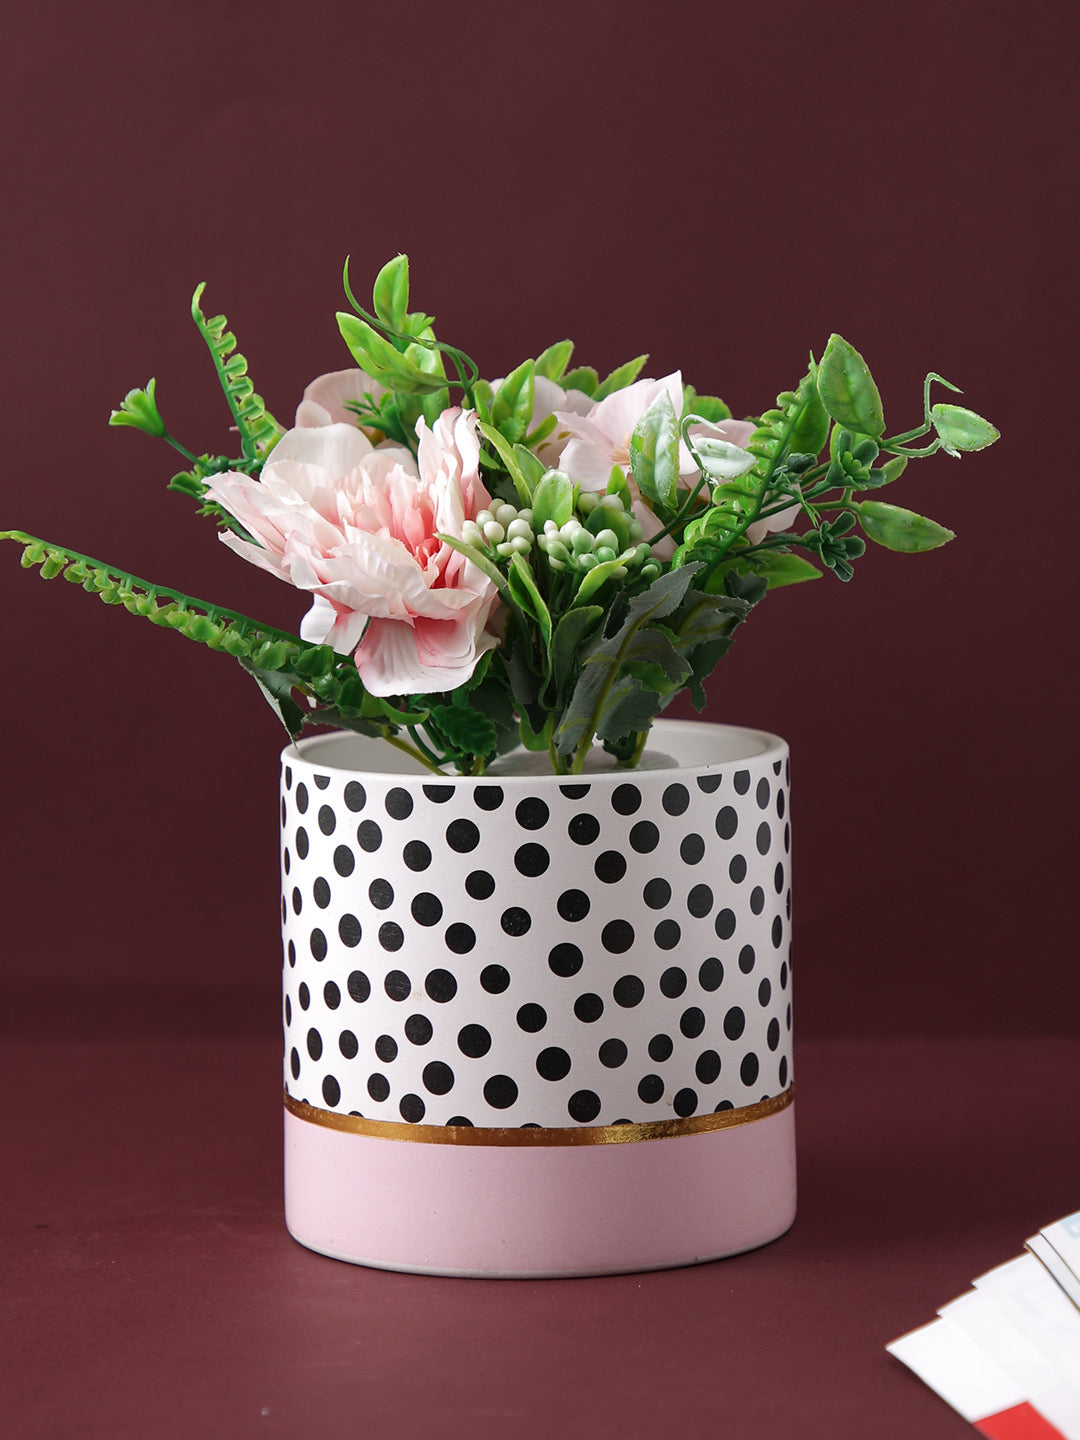 Ceramic Planter with Polka dots Pattern - Default Title (CHC22385D)